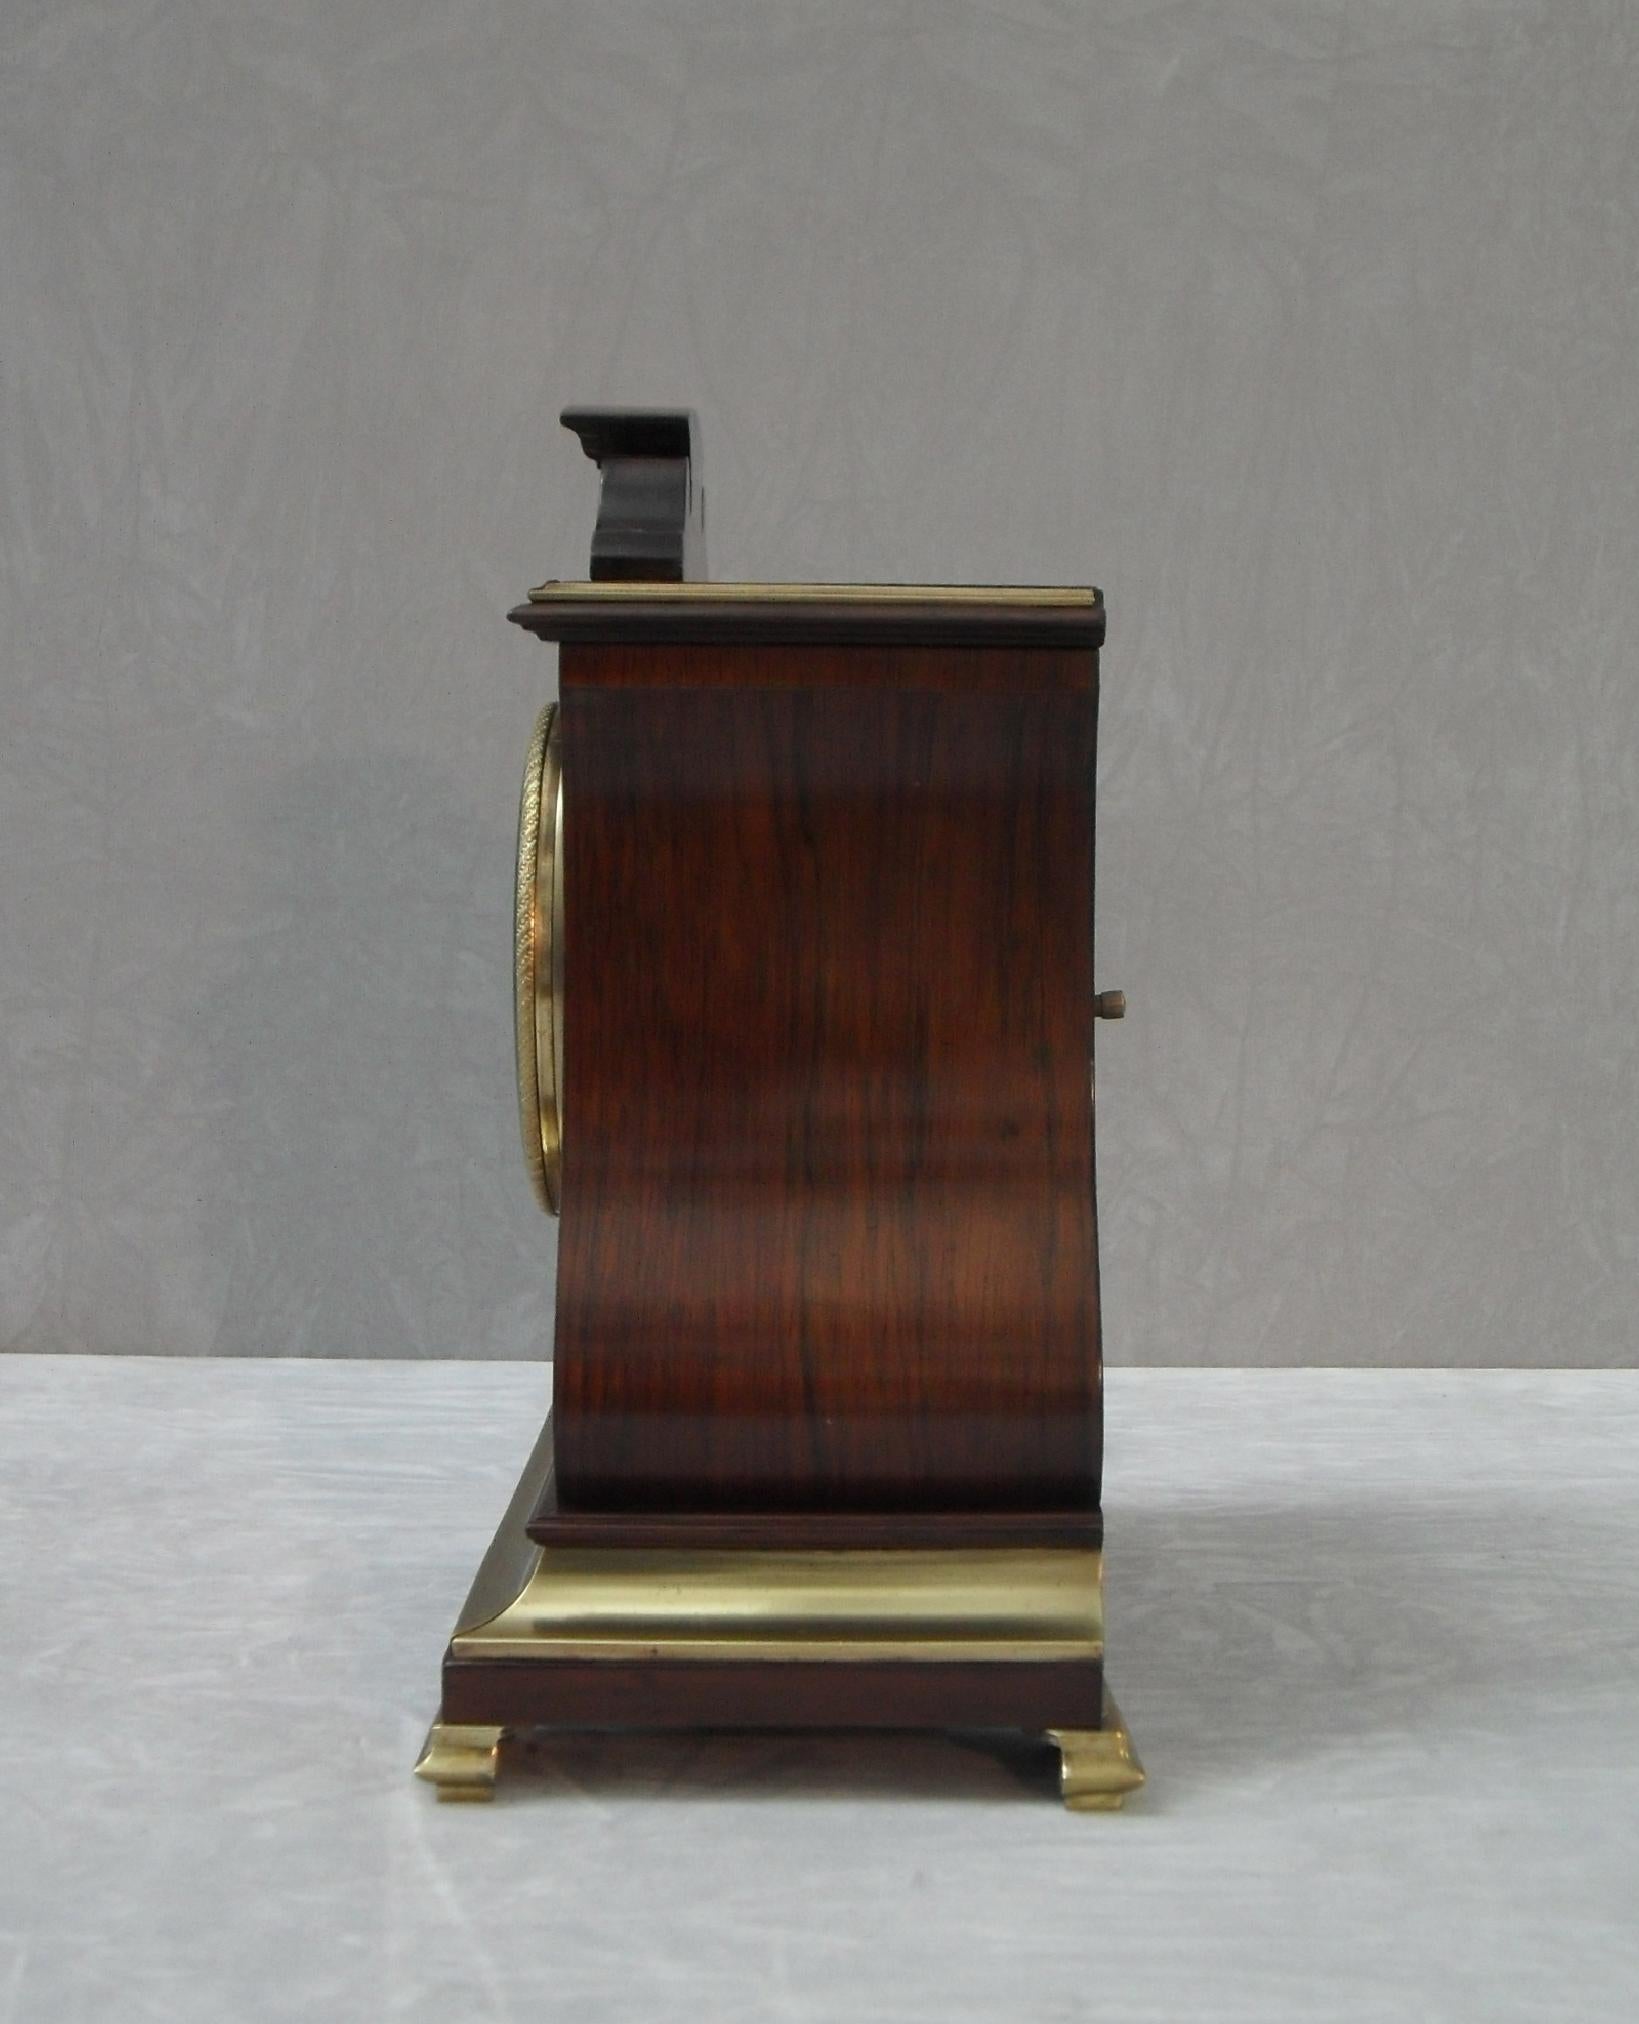 20th Century French Belle Époque Rosewood Inlaid Mantel Clock by A.D Mougin For Sale